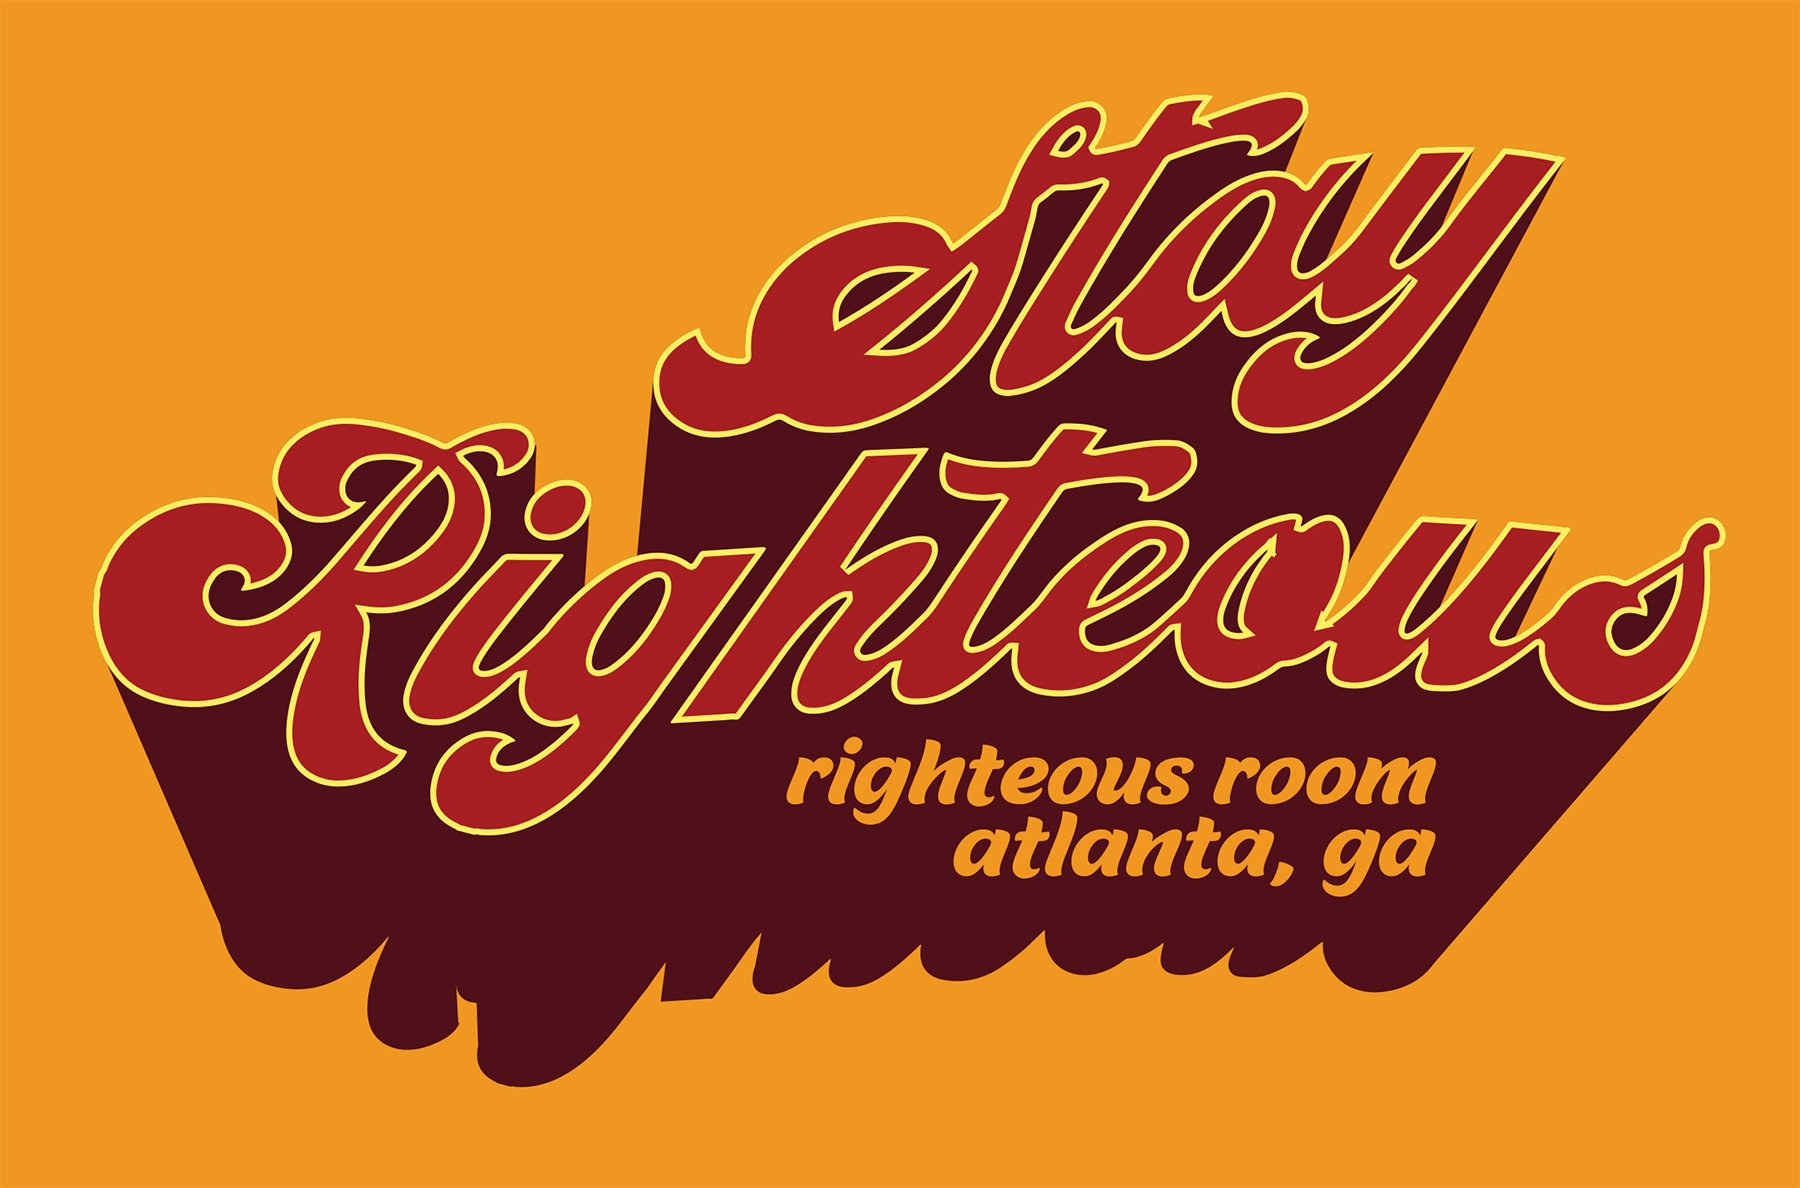 stayrighteous_coloroption1_withbackground.jpg